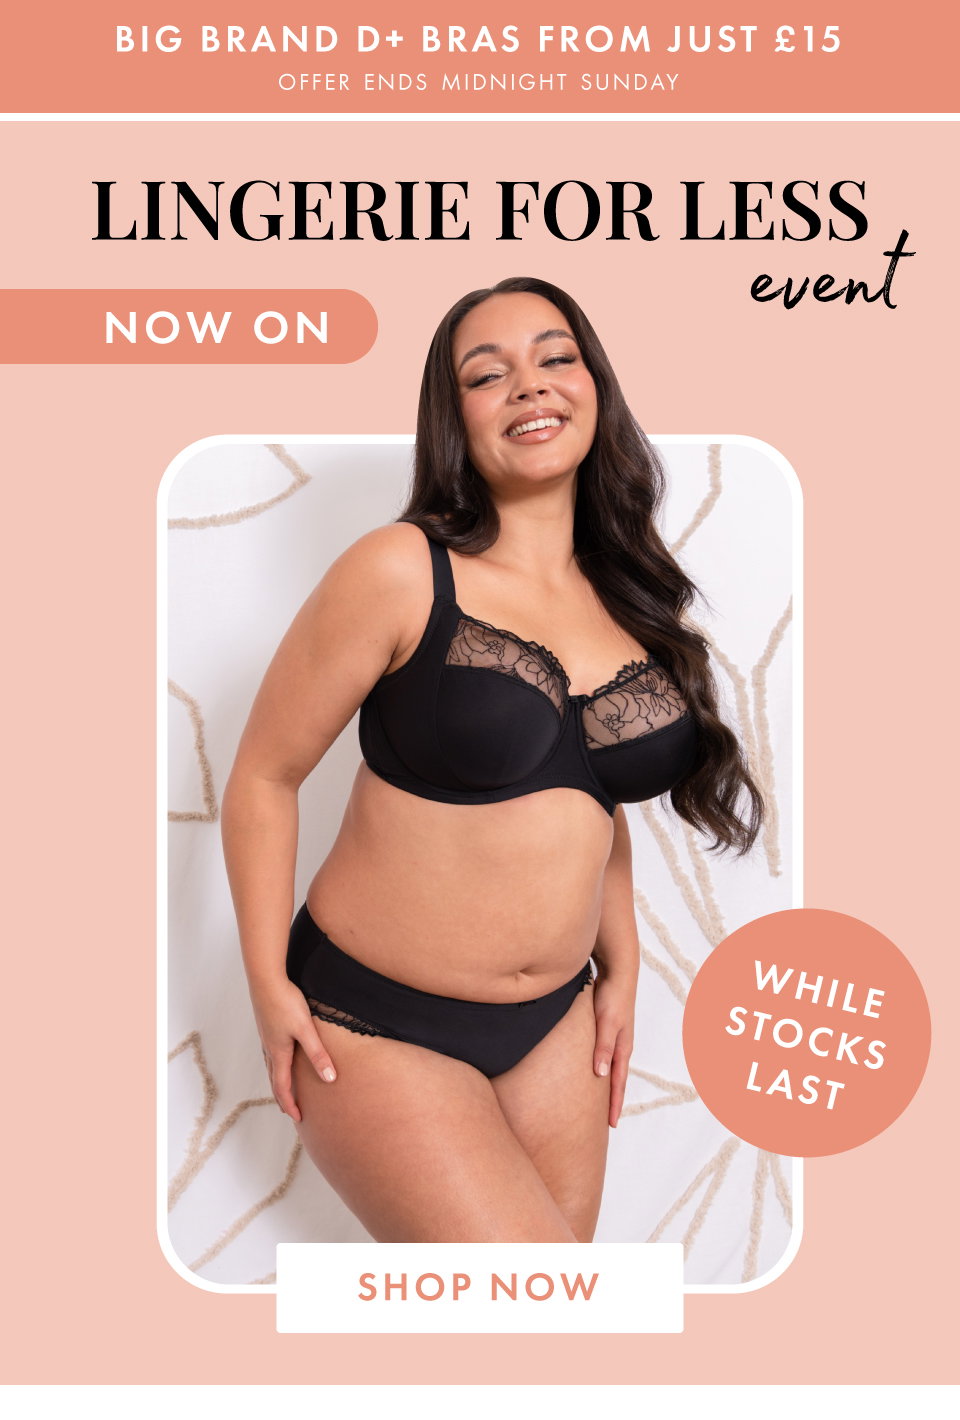 Brastop: NEW OFFER 🚨 Our Lingerie For Less event is NOW ON!